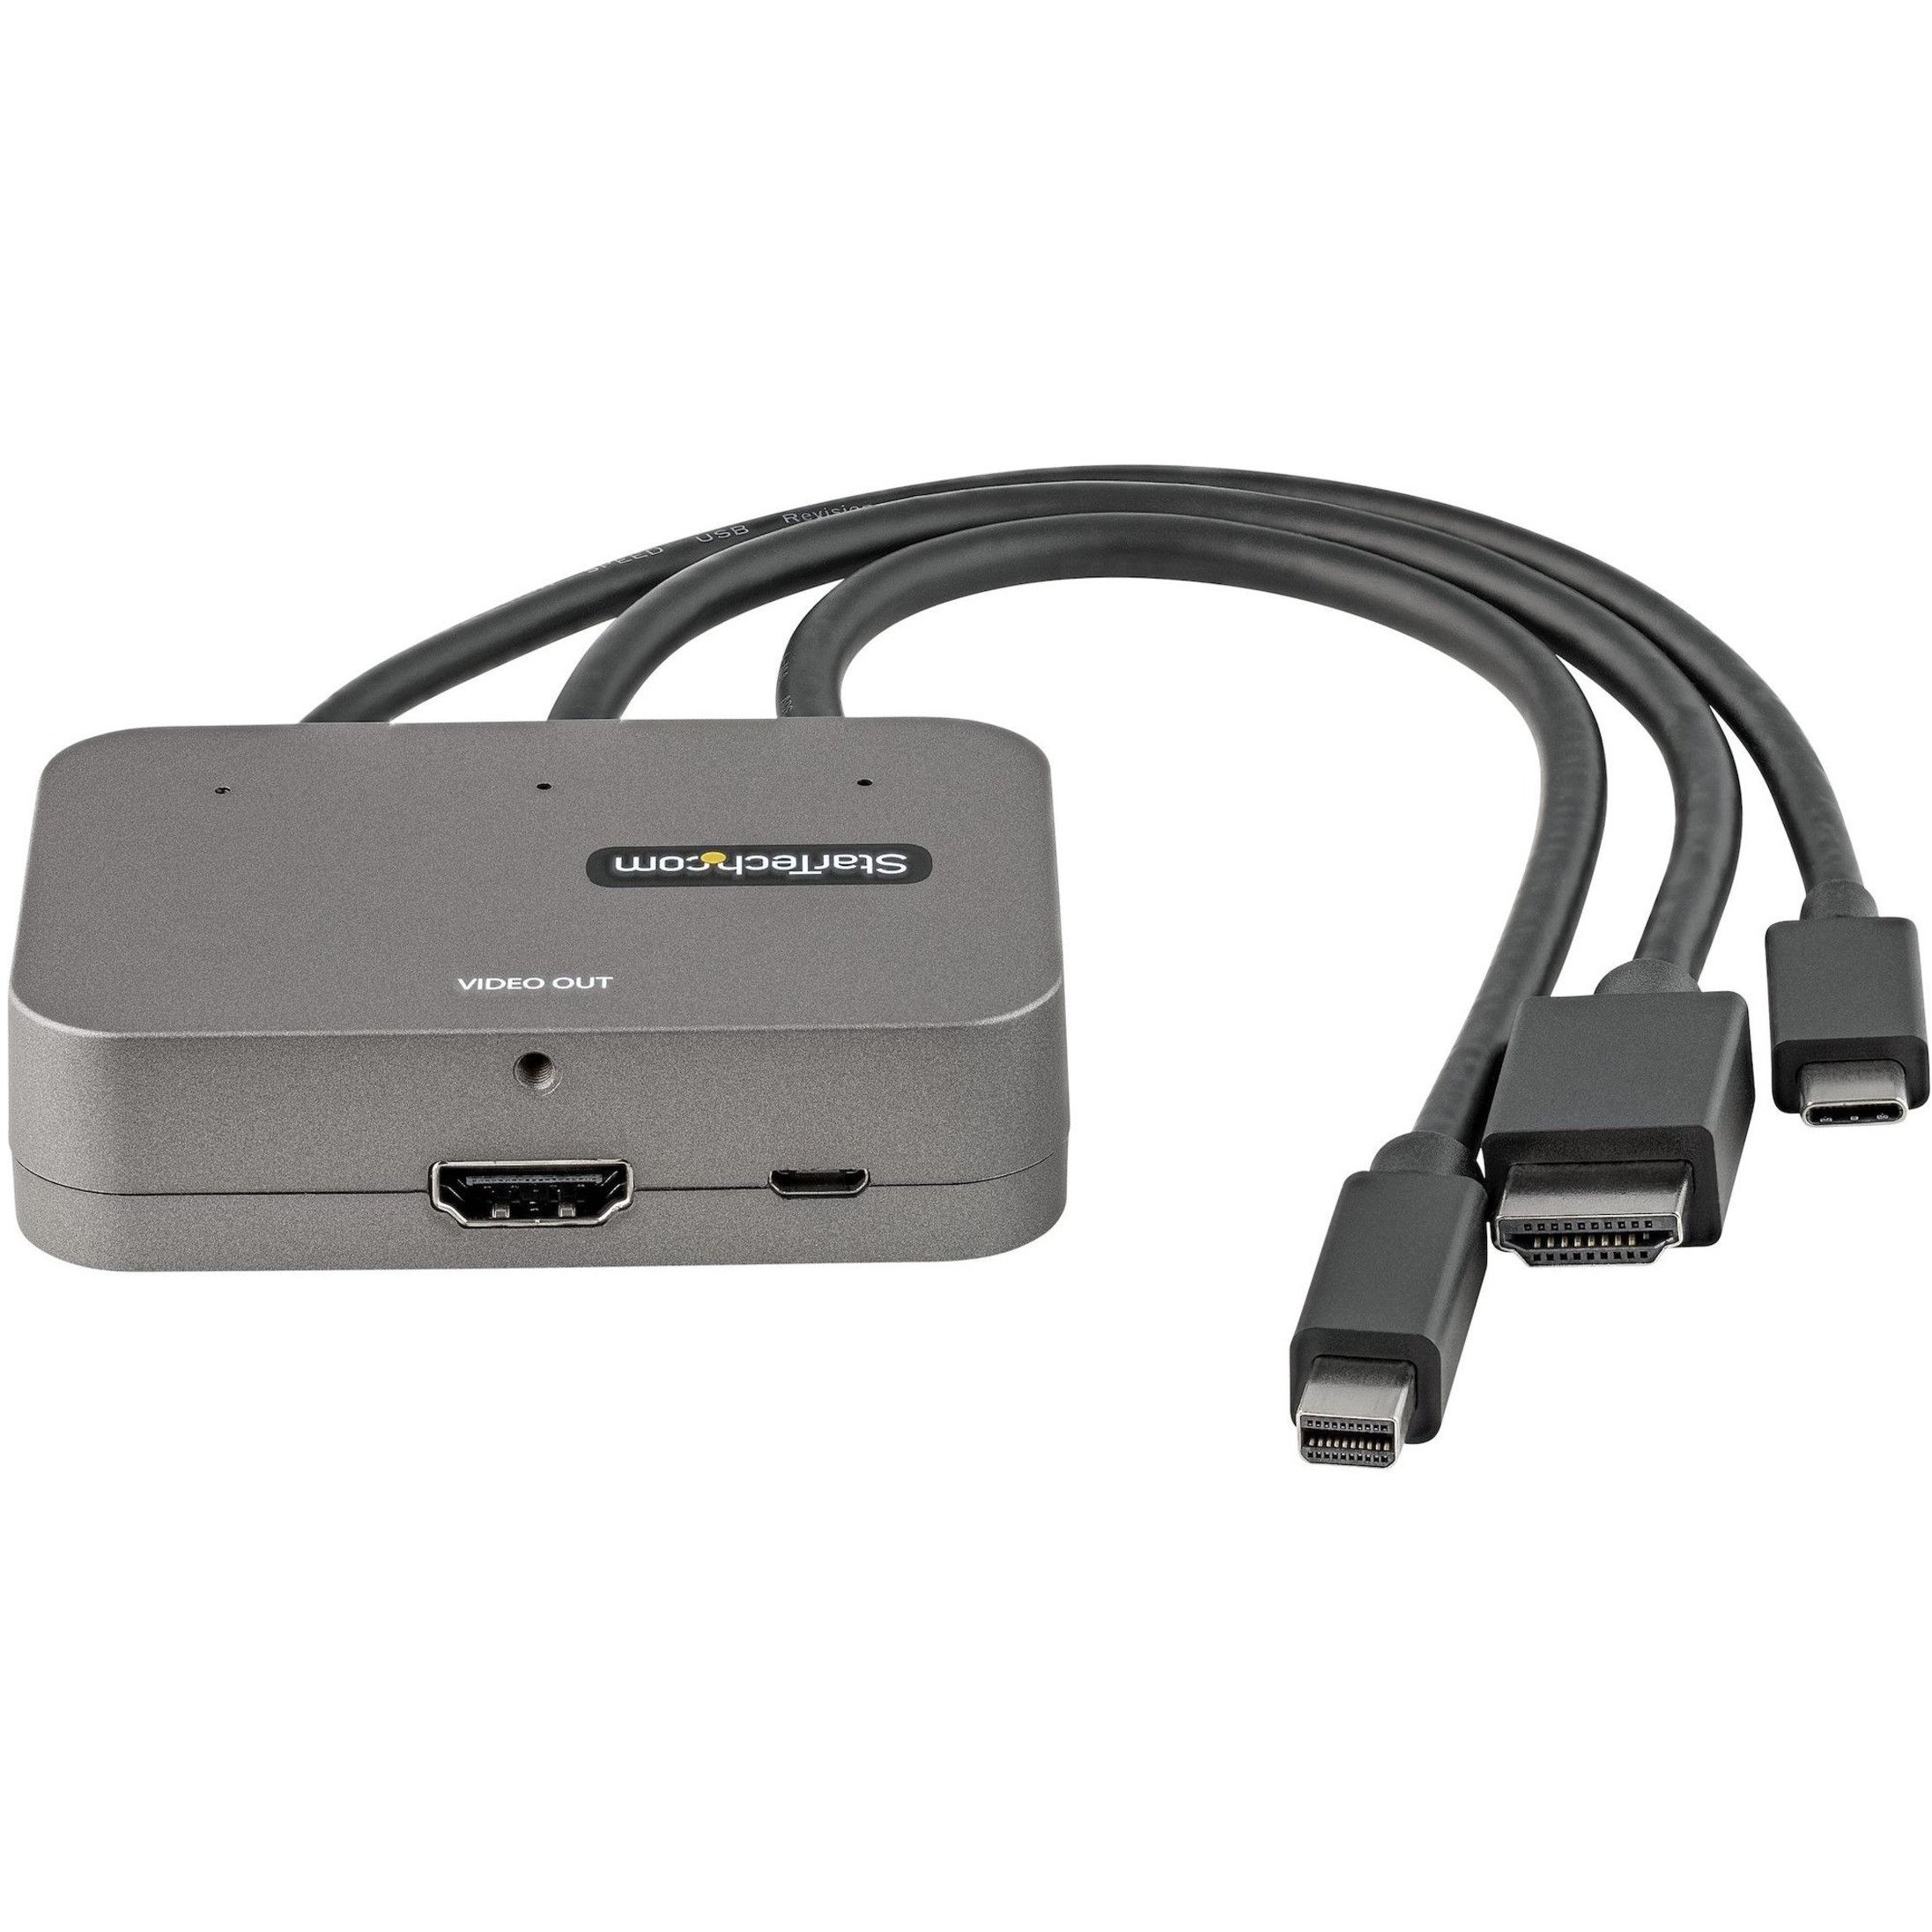 Startech .com 3-in-1 Multiport to HDMI Adapter, 4K 60Hz USB-C